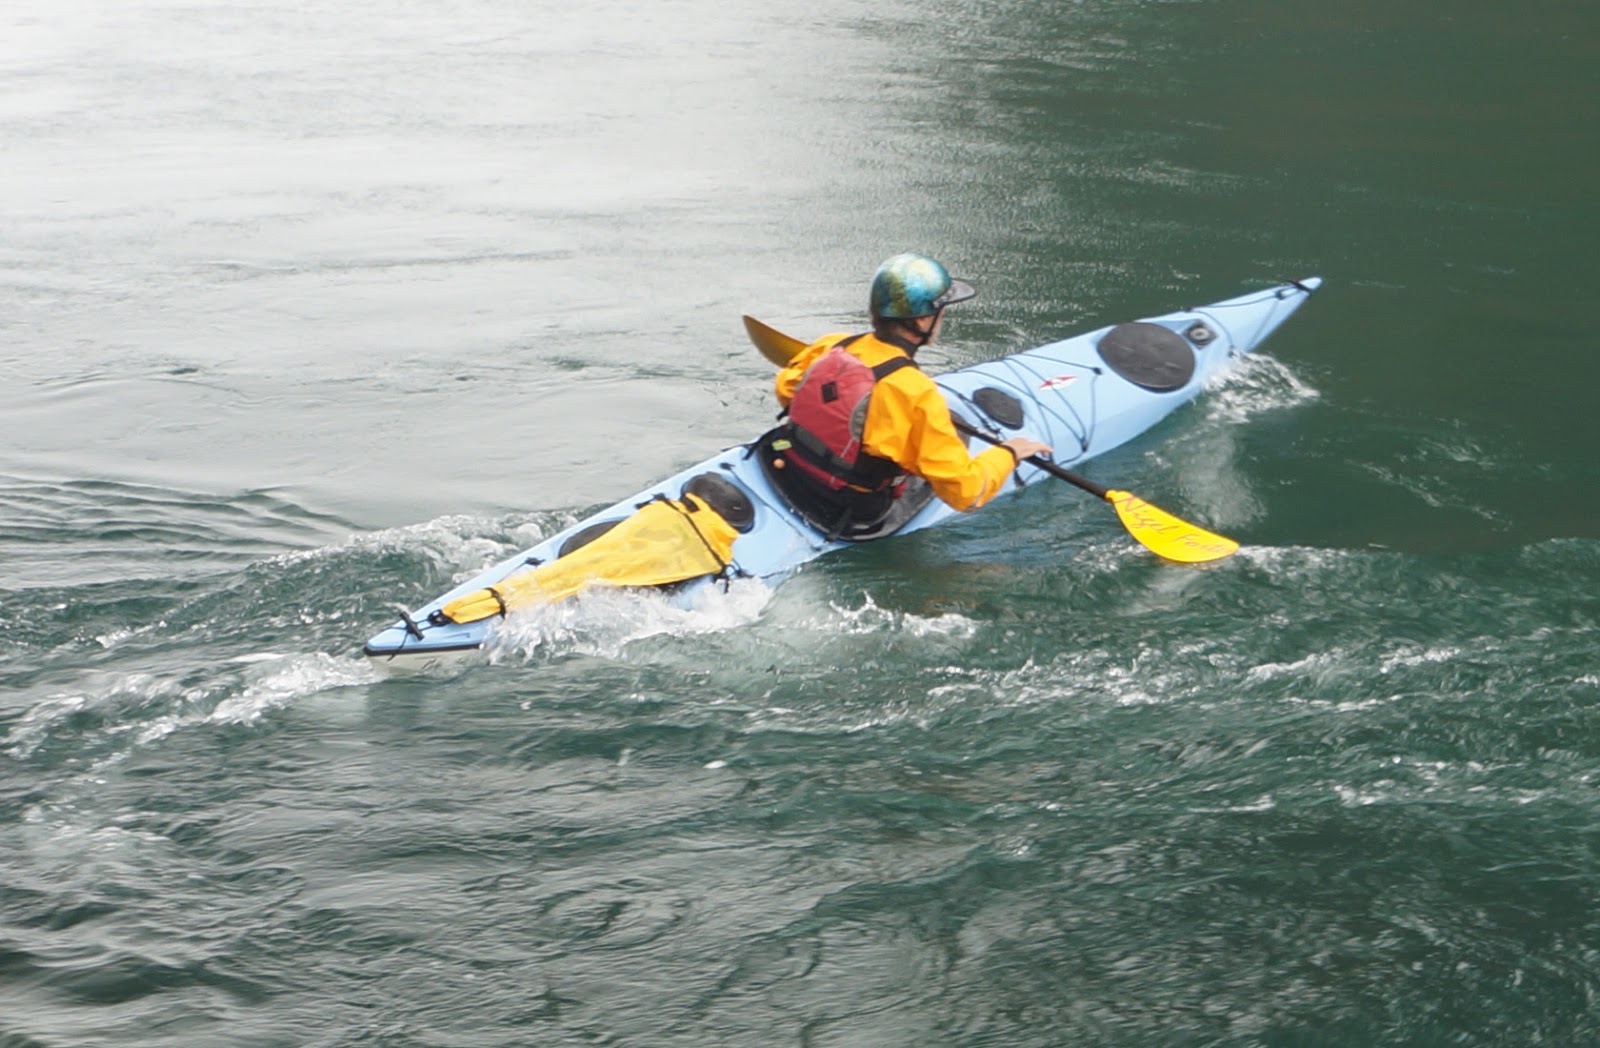 DAUERHAFT Oar Blade Help To Save Energy During The Stroke Stable,for Kayaks